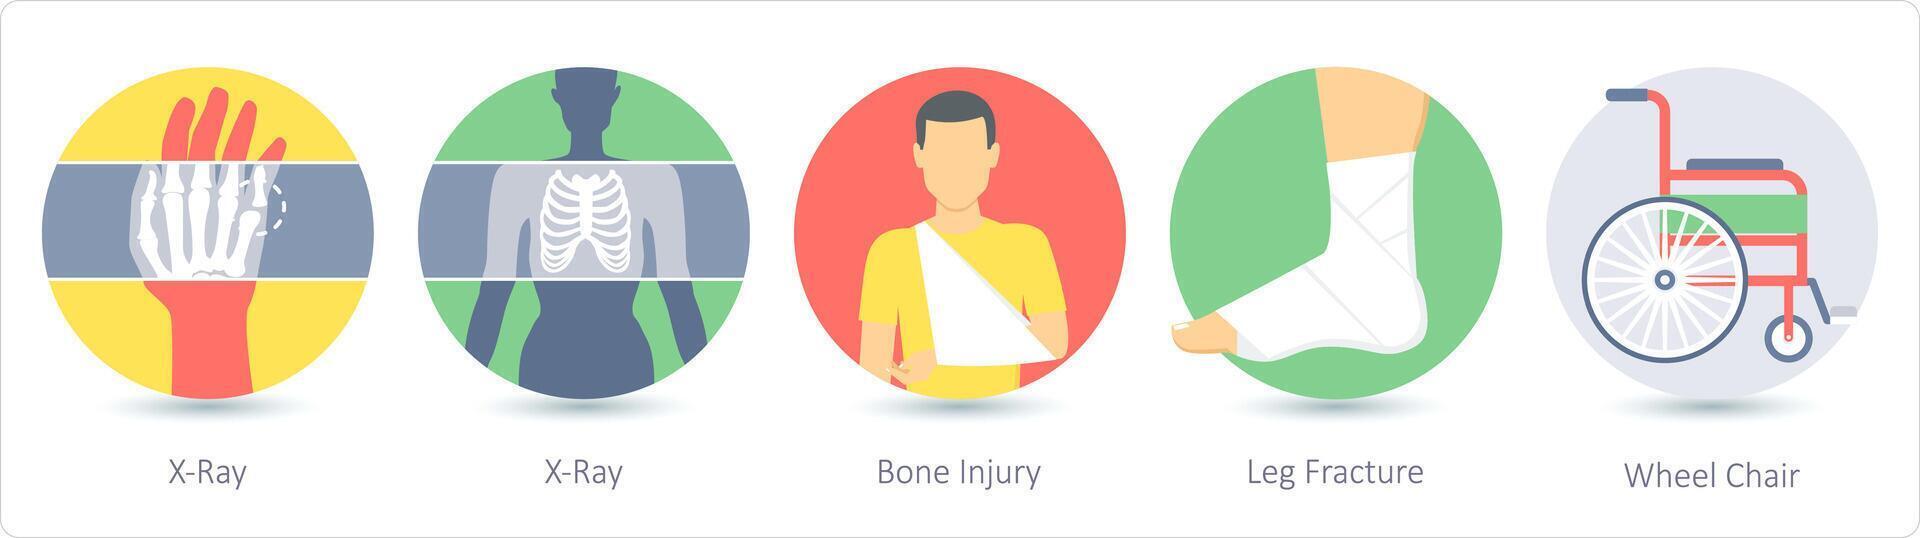 A set of 5 medical icons as x-ray, bone injury, leg fracture vector